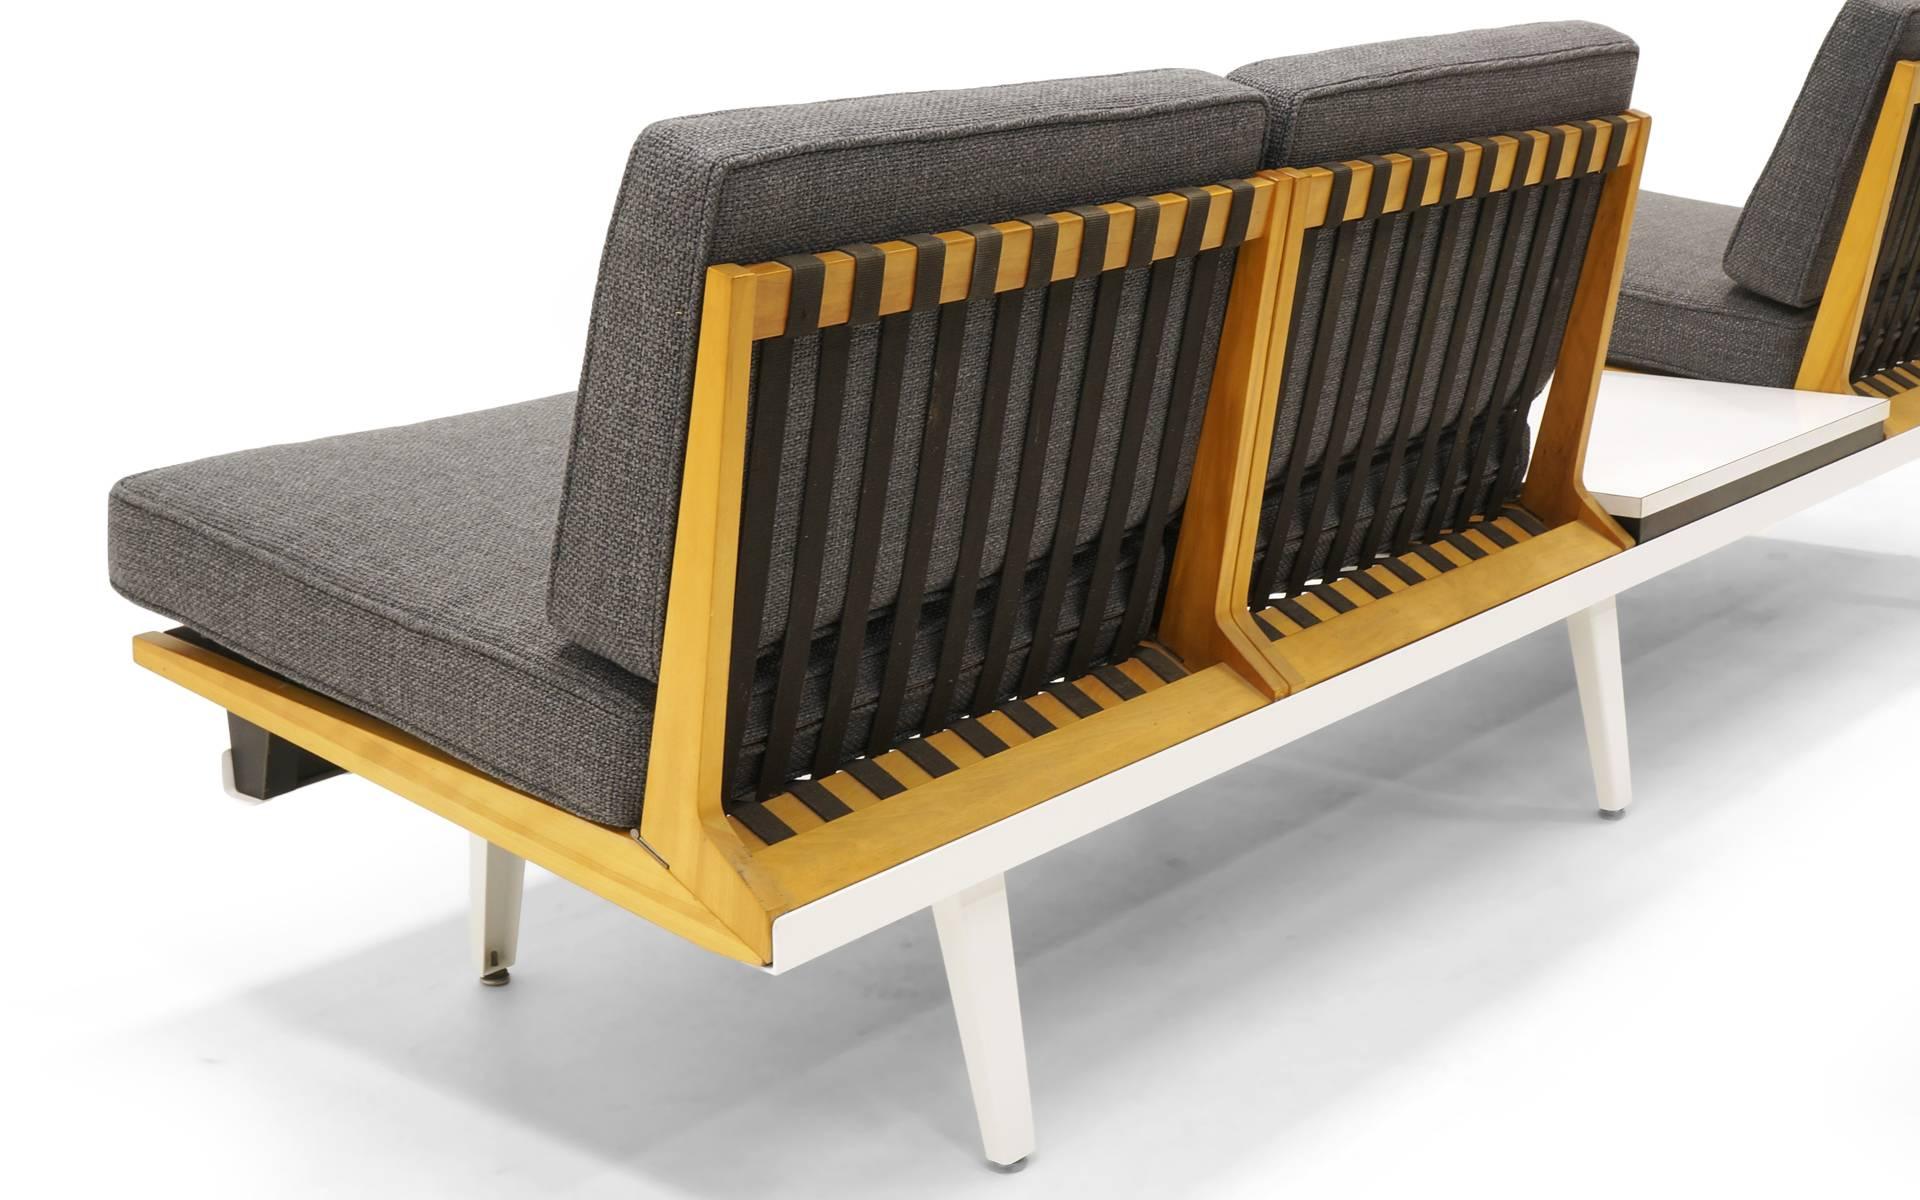 Mid-20th Century Steel Frame Sofa, Bench and Coffee Table by George Nelson for Herman Miller